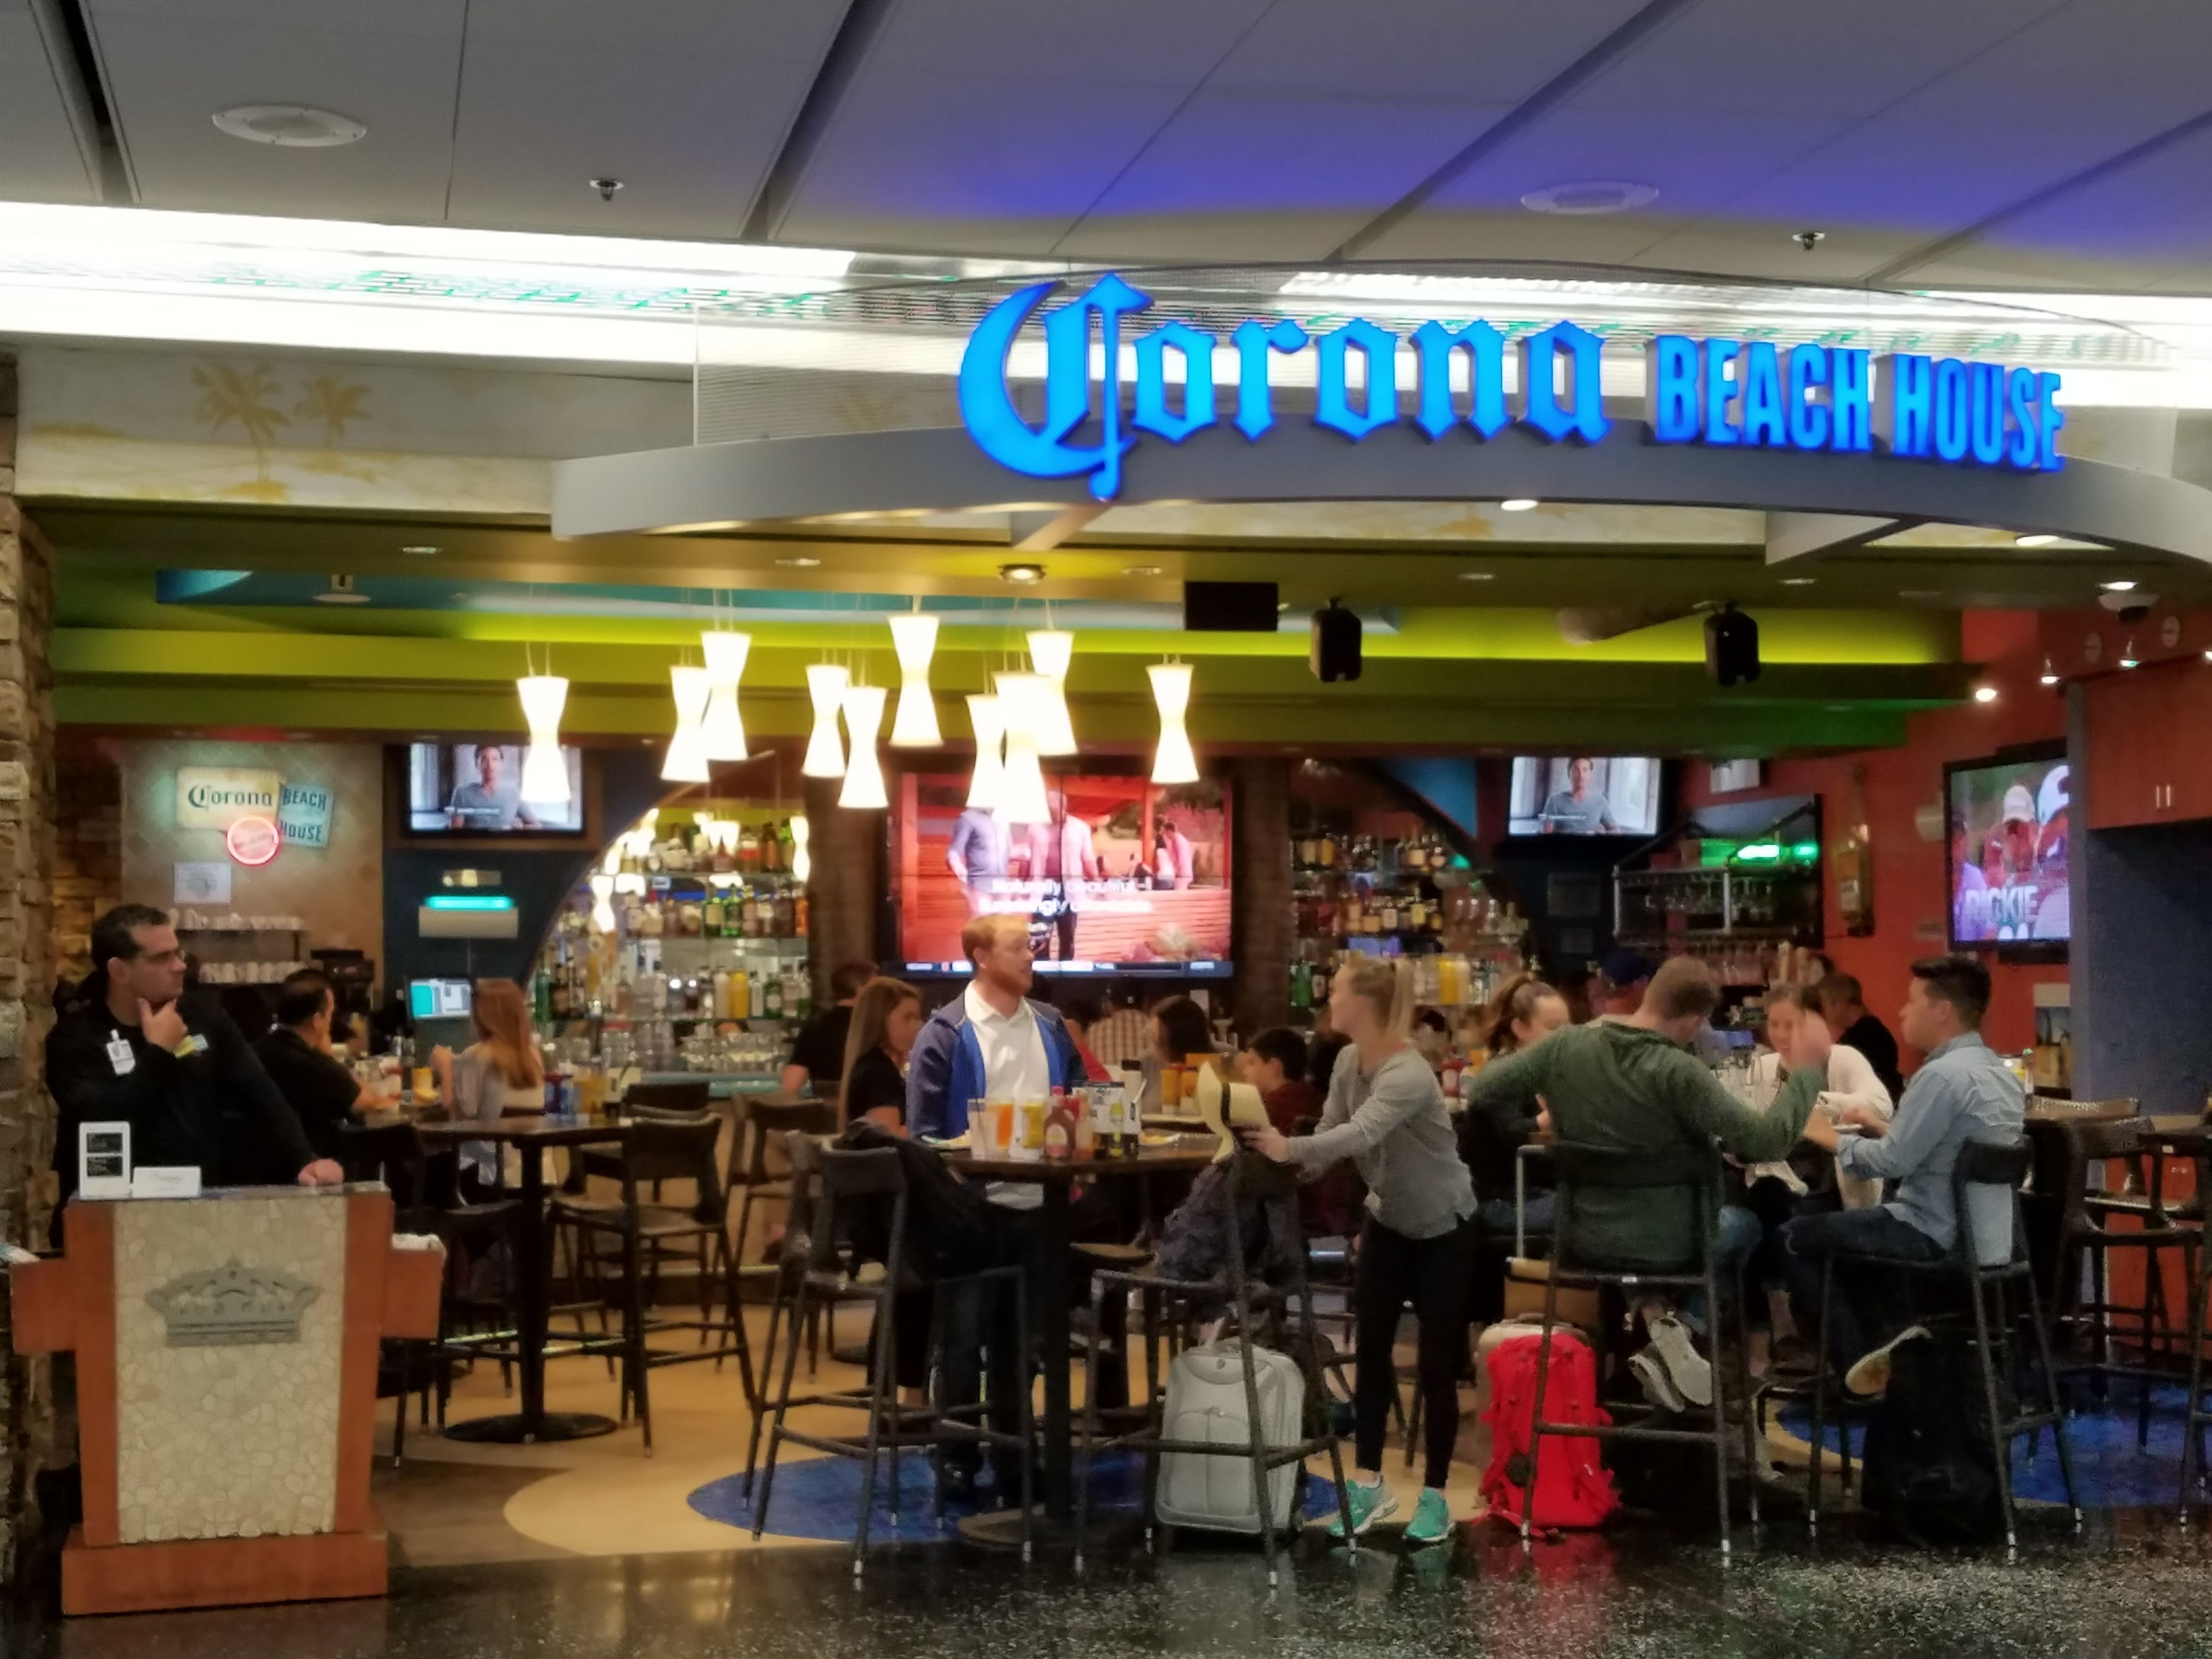 People sitting at an airport bar